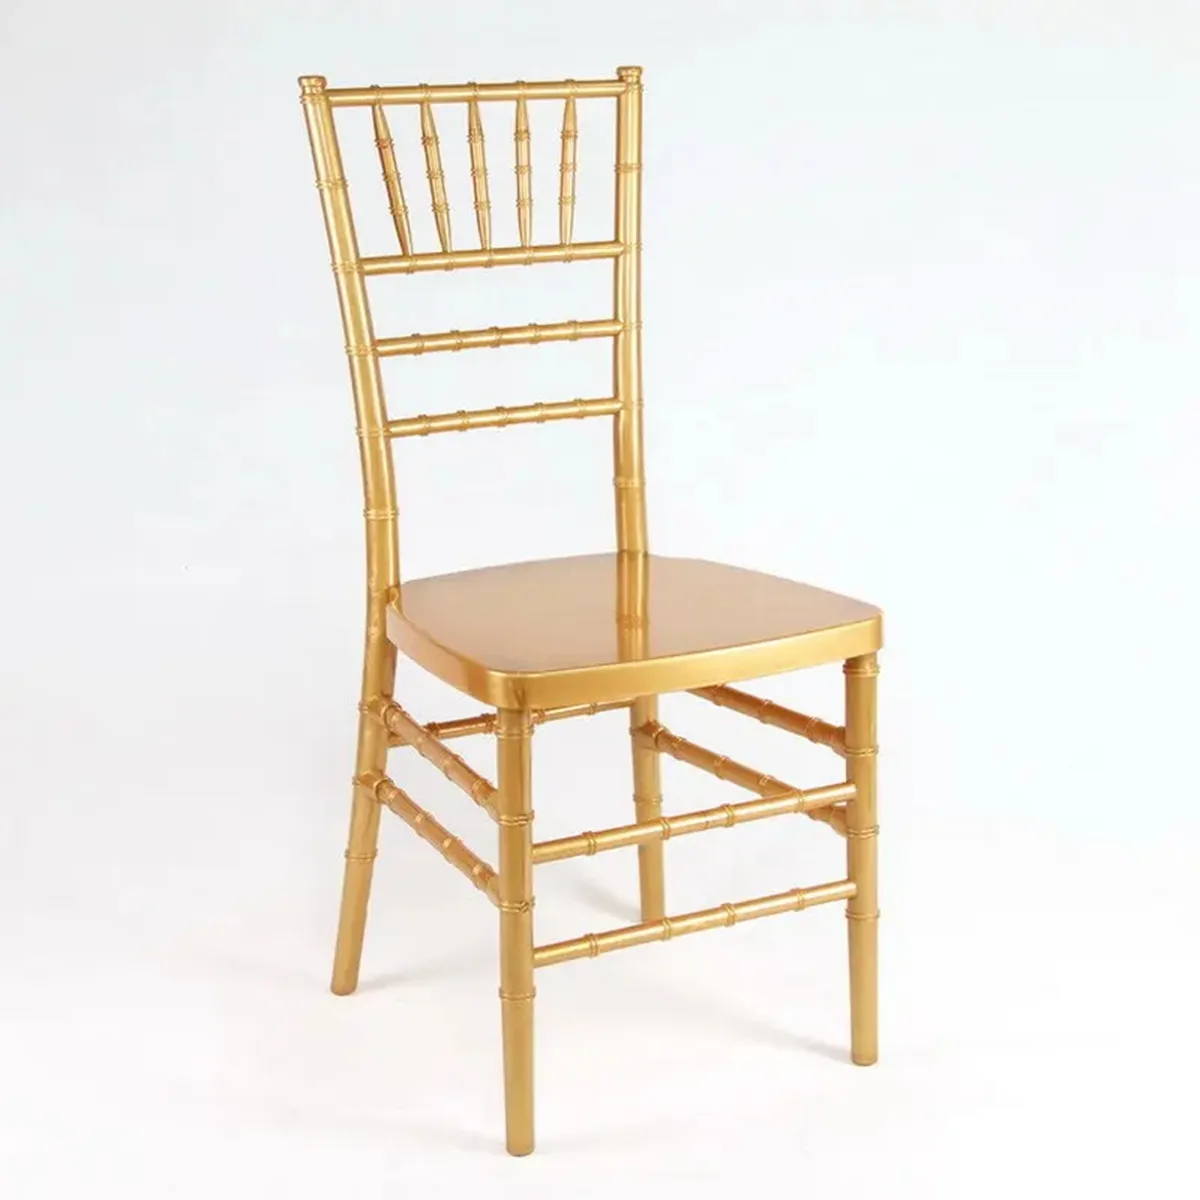 Modern Luxury Round Back plastics Gold Chairs For Wedding Events Party Hot Selling hotel Wedding Chairs